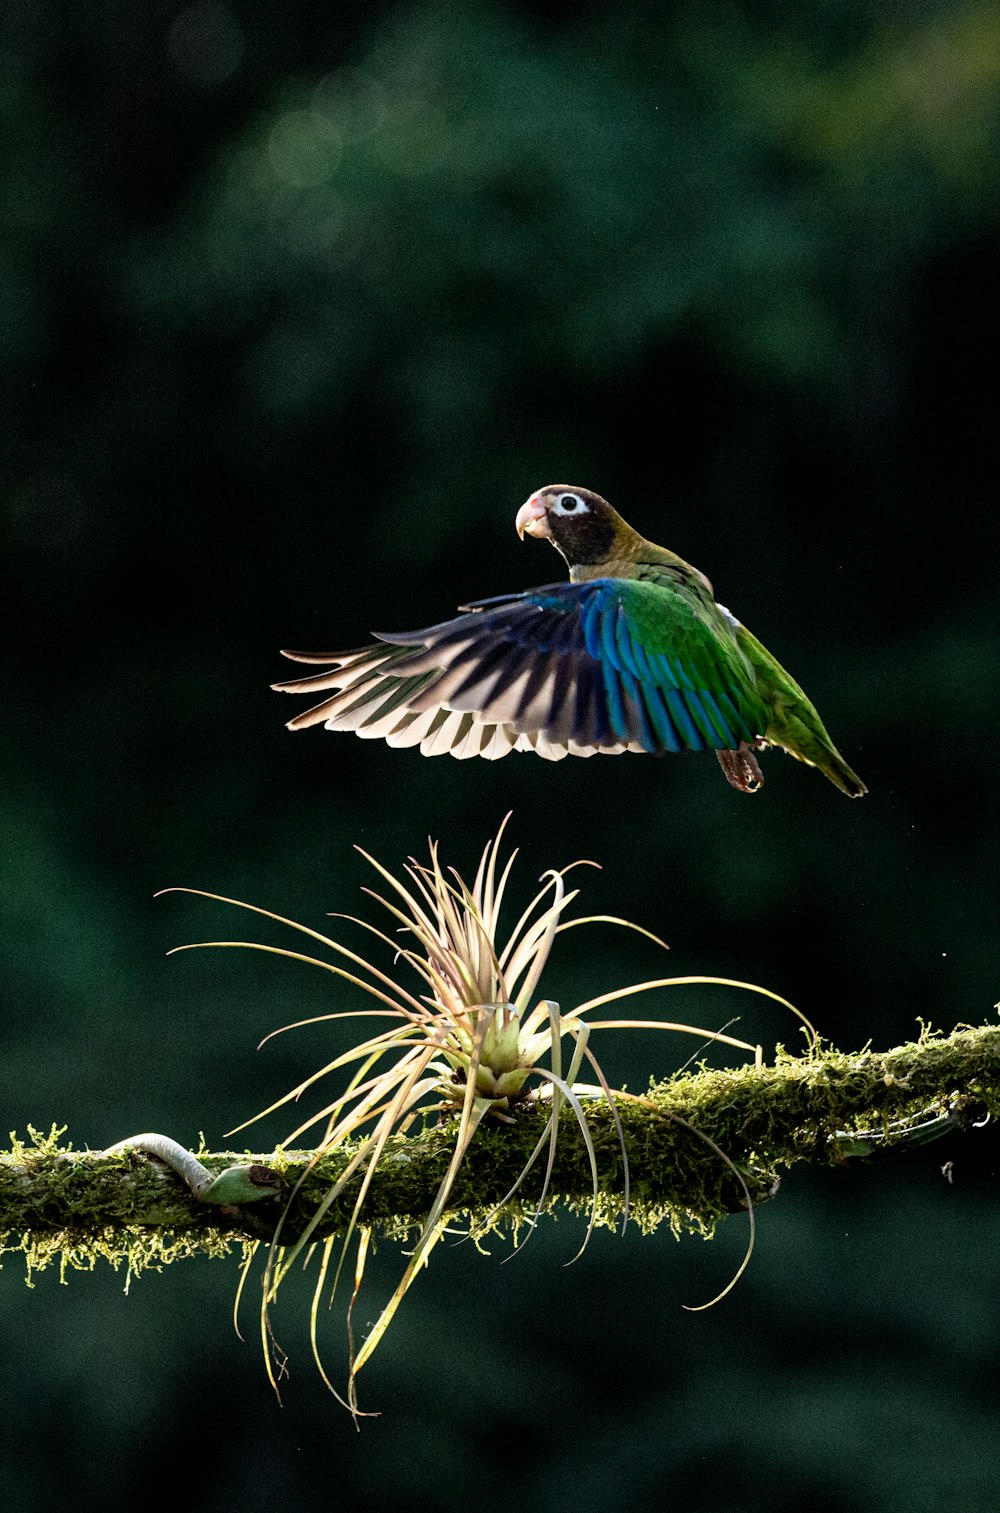 a colorful bird flying over a moss covered branch